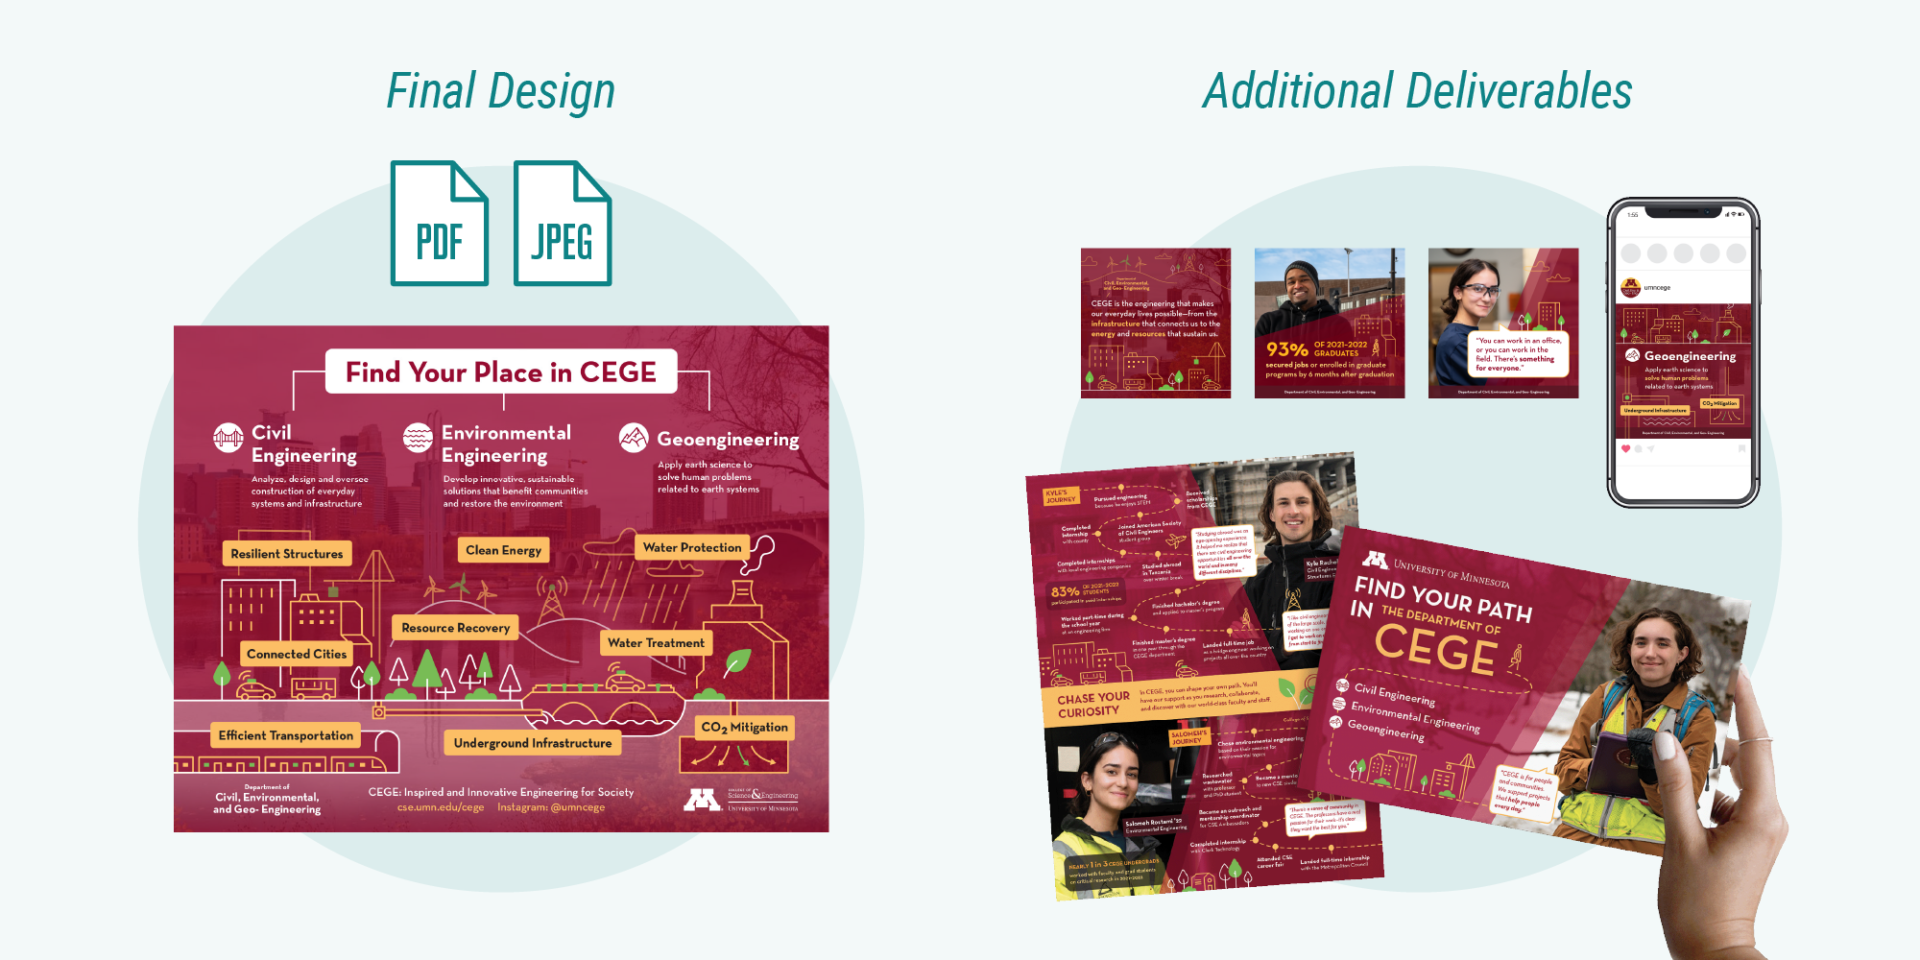 Graphic showing a finished infographic and additional deliverables like social media graphics and a physical mailer